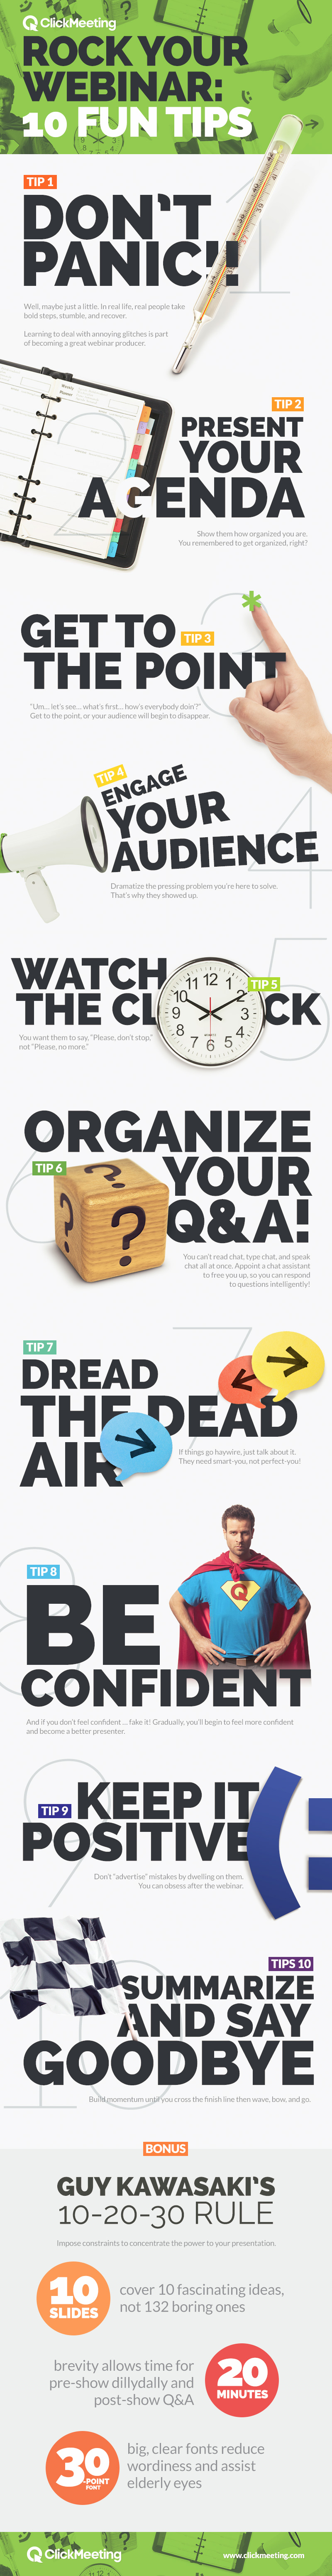 Infographic: 10 Fun Tips to Get Ready for Your Webinar